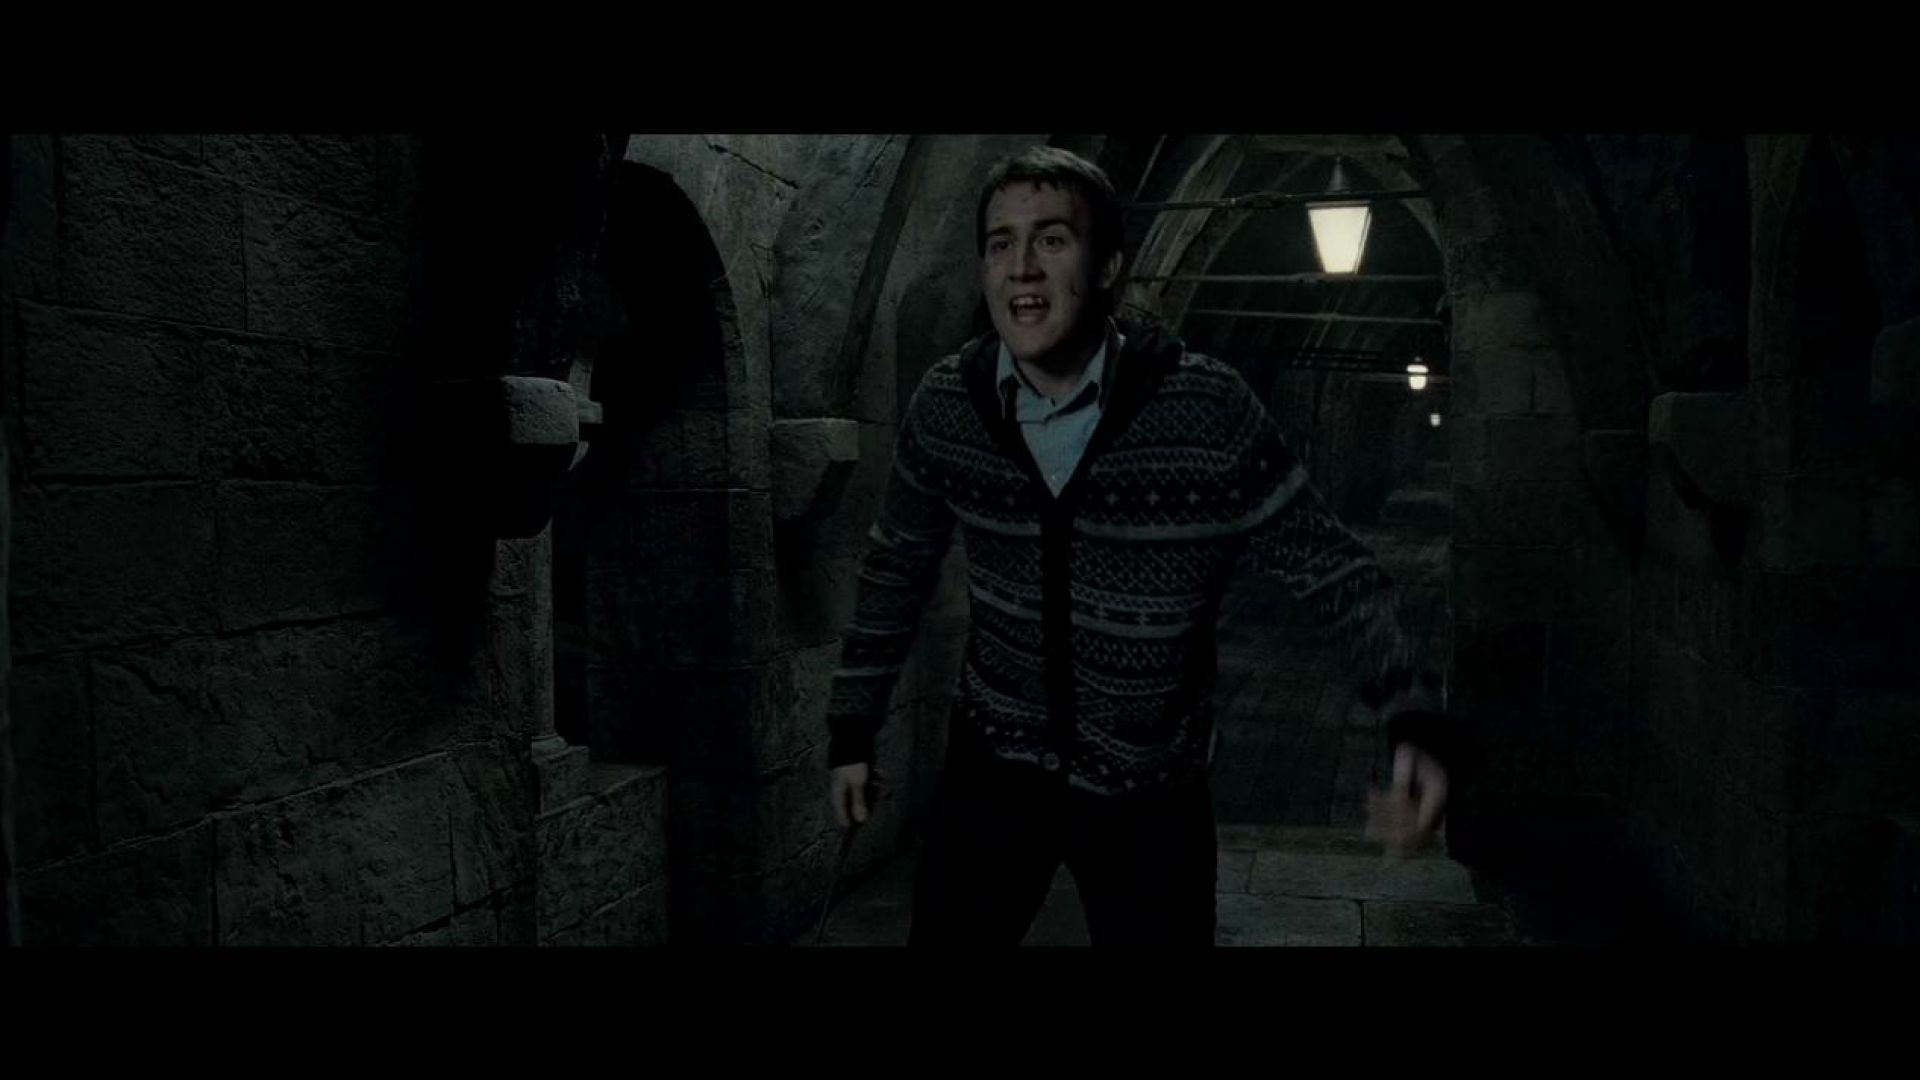 Neville: Yeah, you lose army! Harry Potter and the Deathly Hallows Part 2